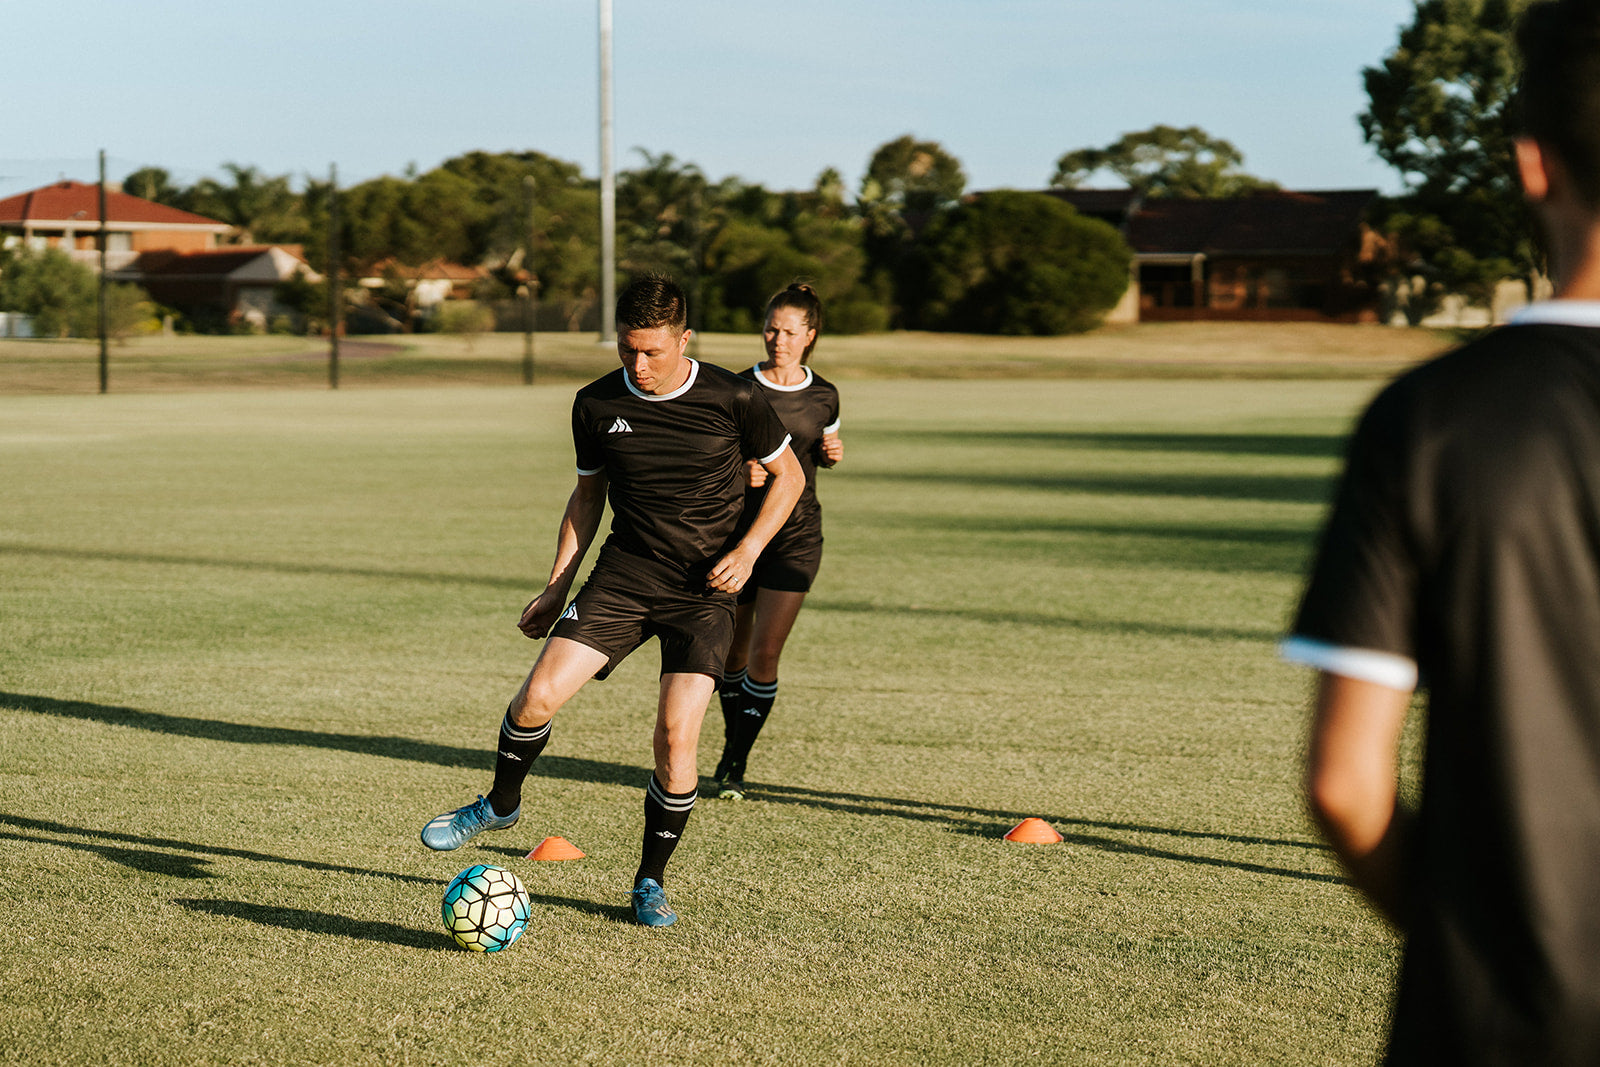 Mens training soccer/football apparel. Made in Australia from flexible breathable material keeping you dry in all conditions. Made to suit your team with custom colour, sponsors and logos.